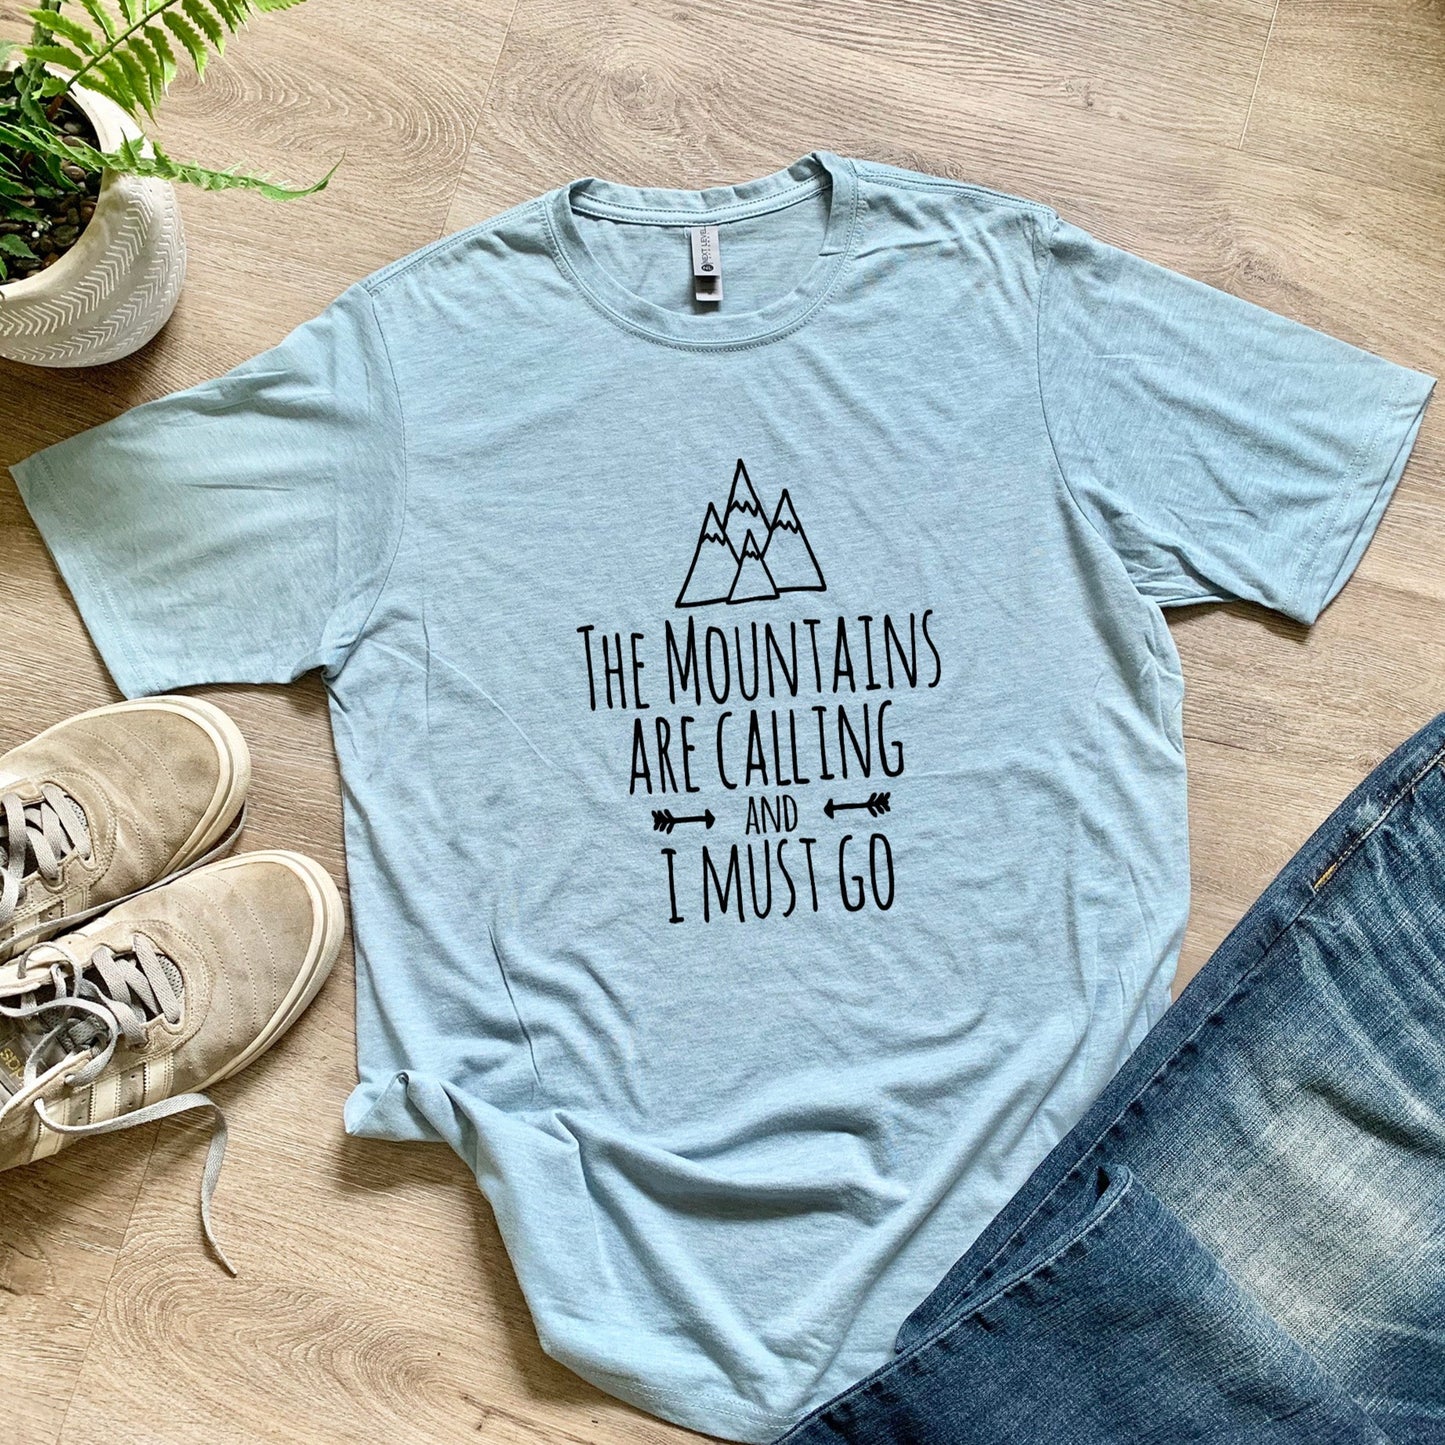 The Mountains Are Calling And I Must Go - Men's / Unisex Tee - Stonewash Blue or Sage